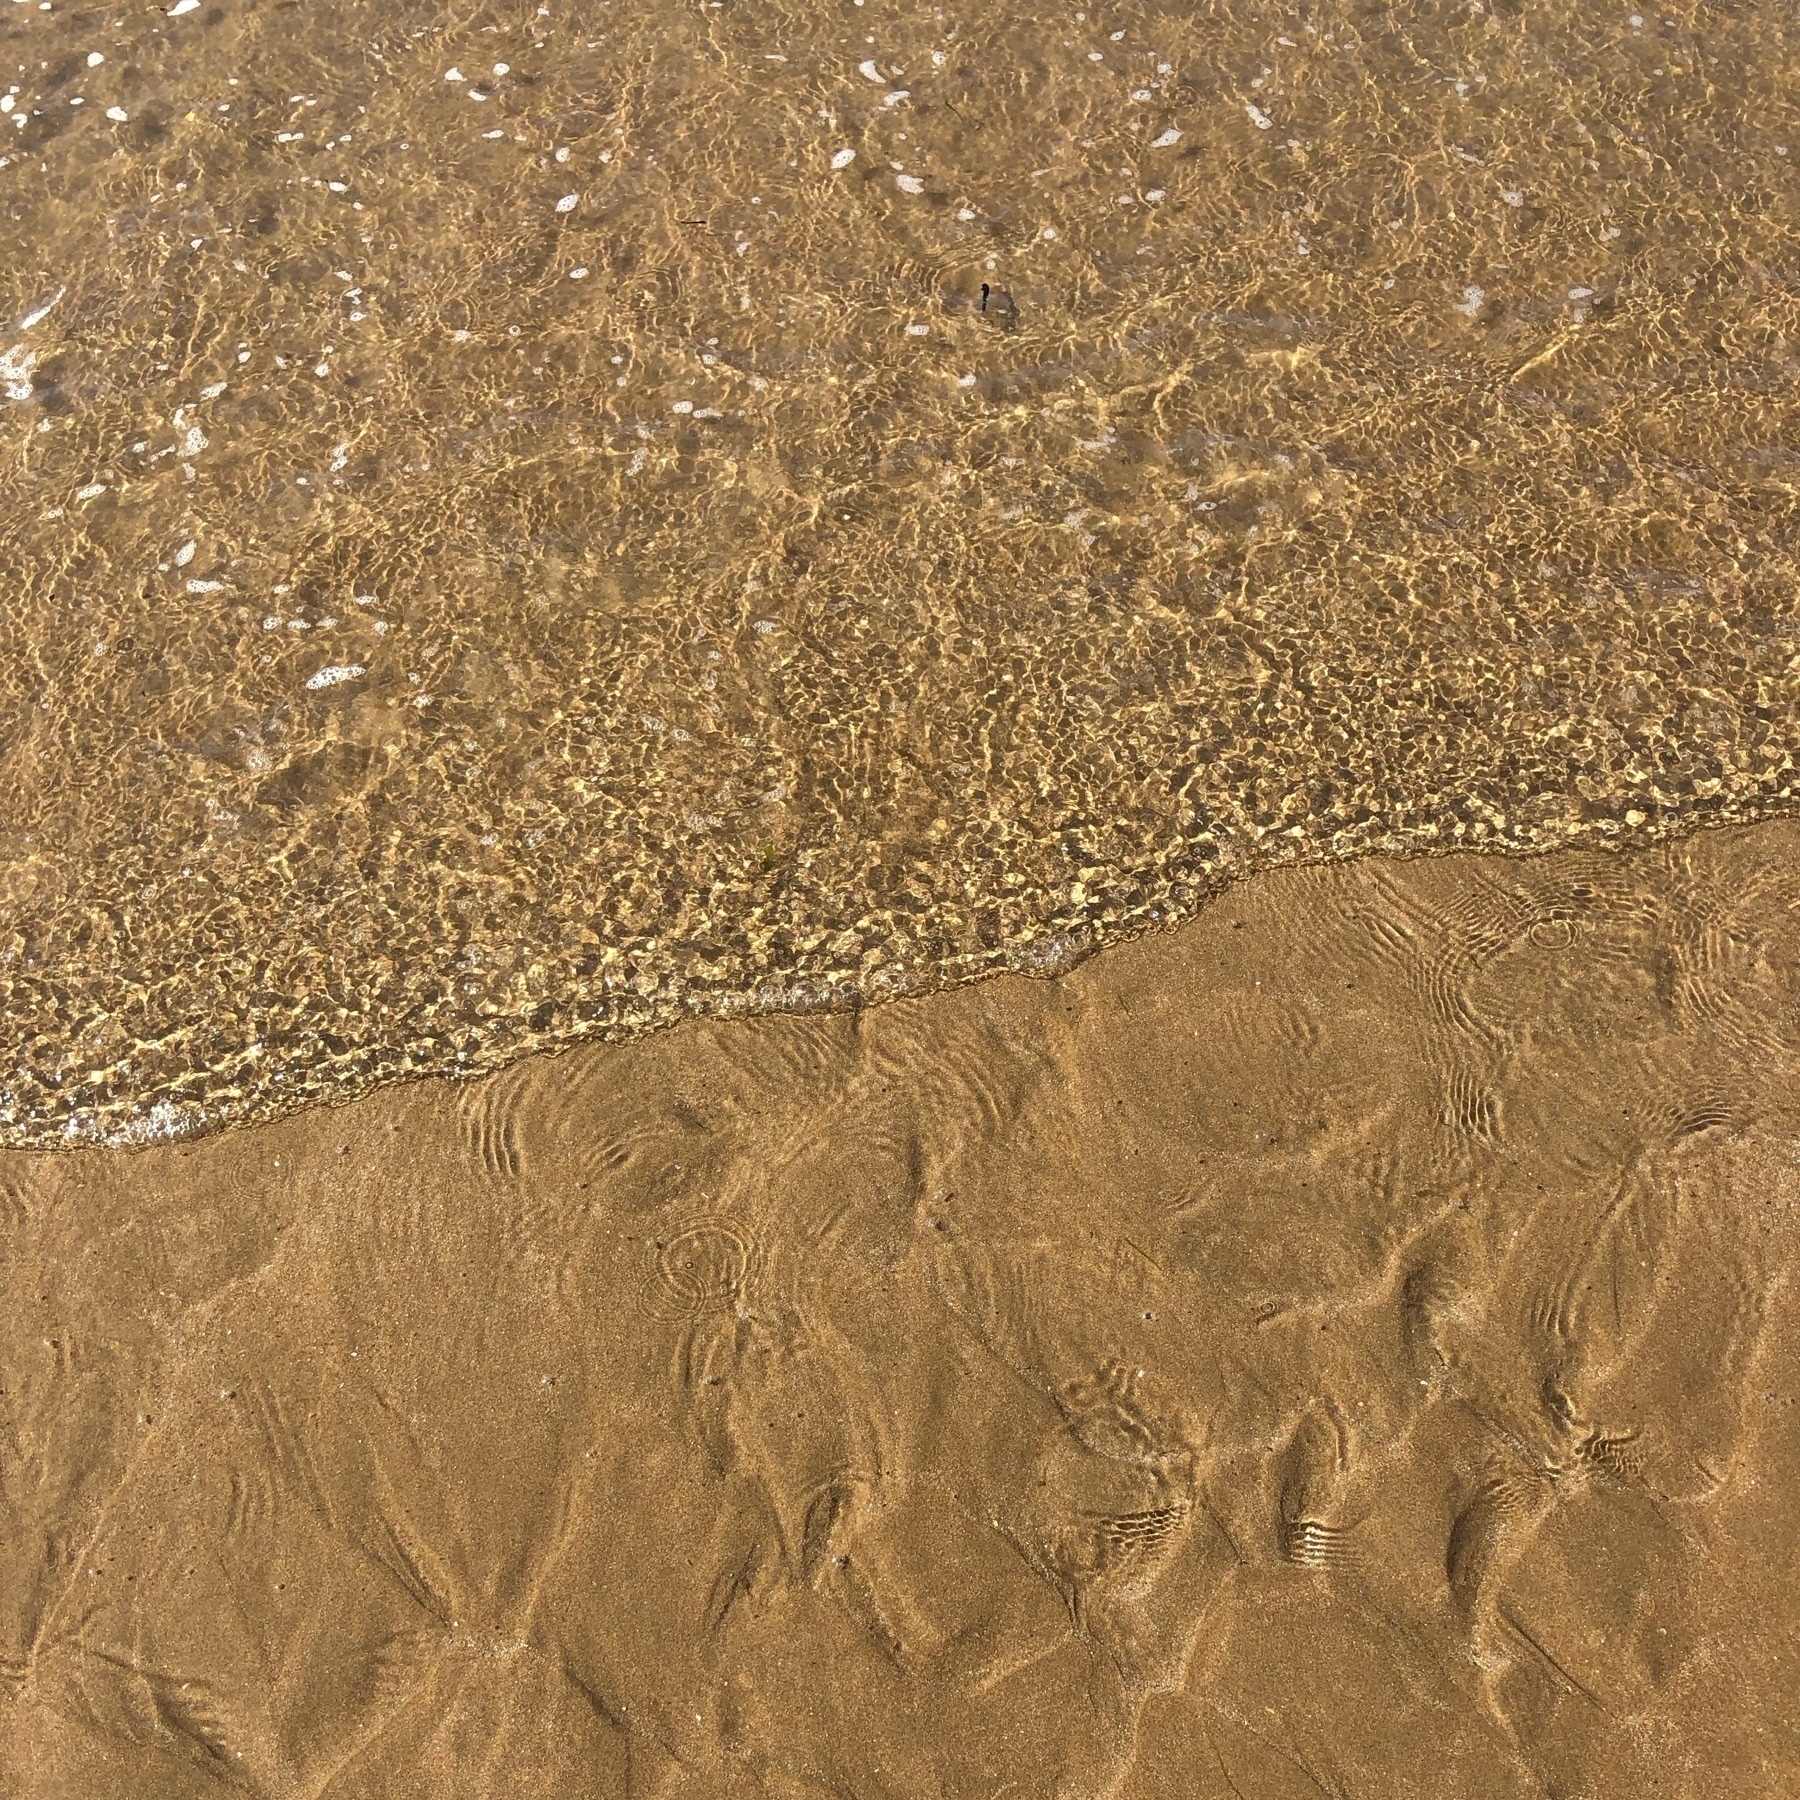 Water coming out at the beach shore